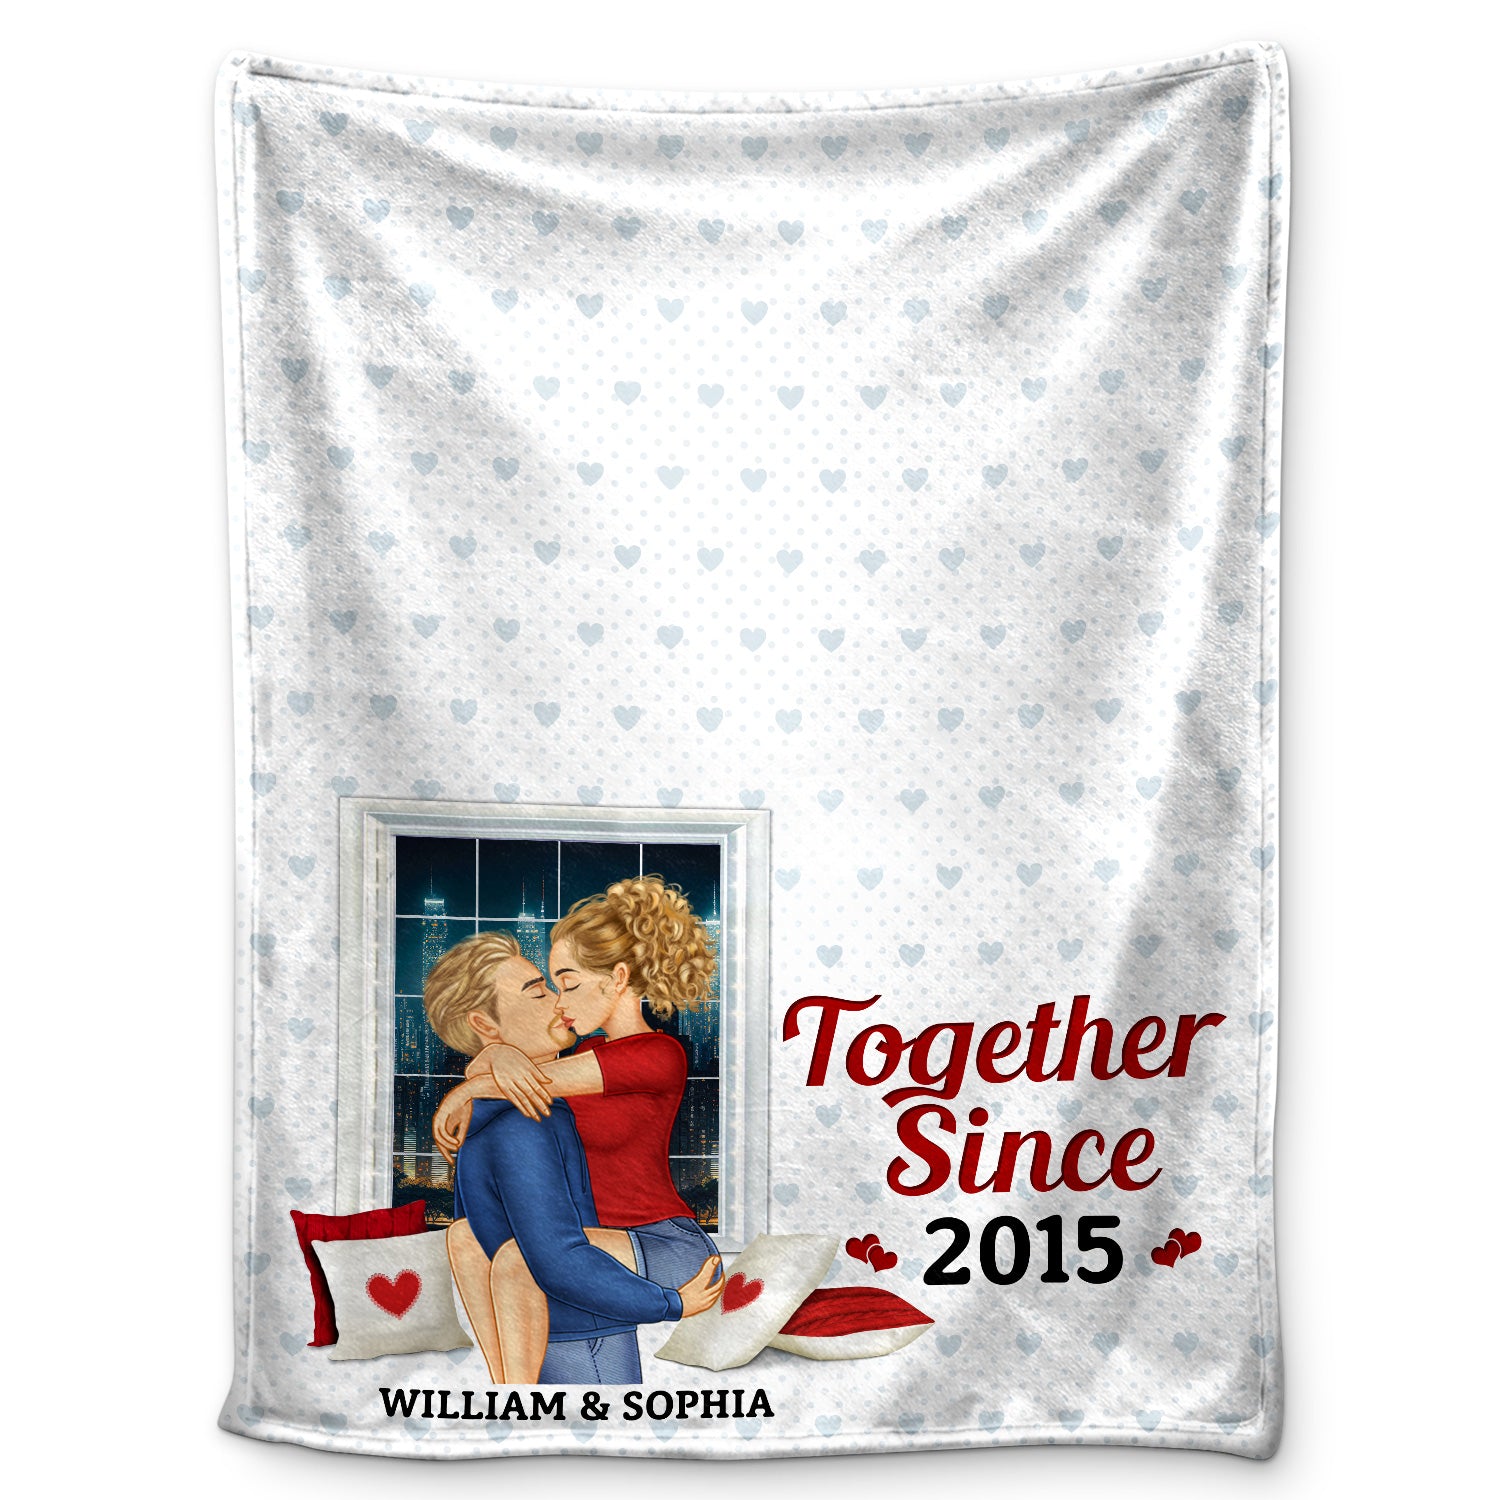 Together Since - Gift For Couples, Husband And Wife - Personalized Fleece Blanket